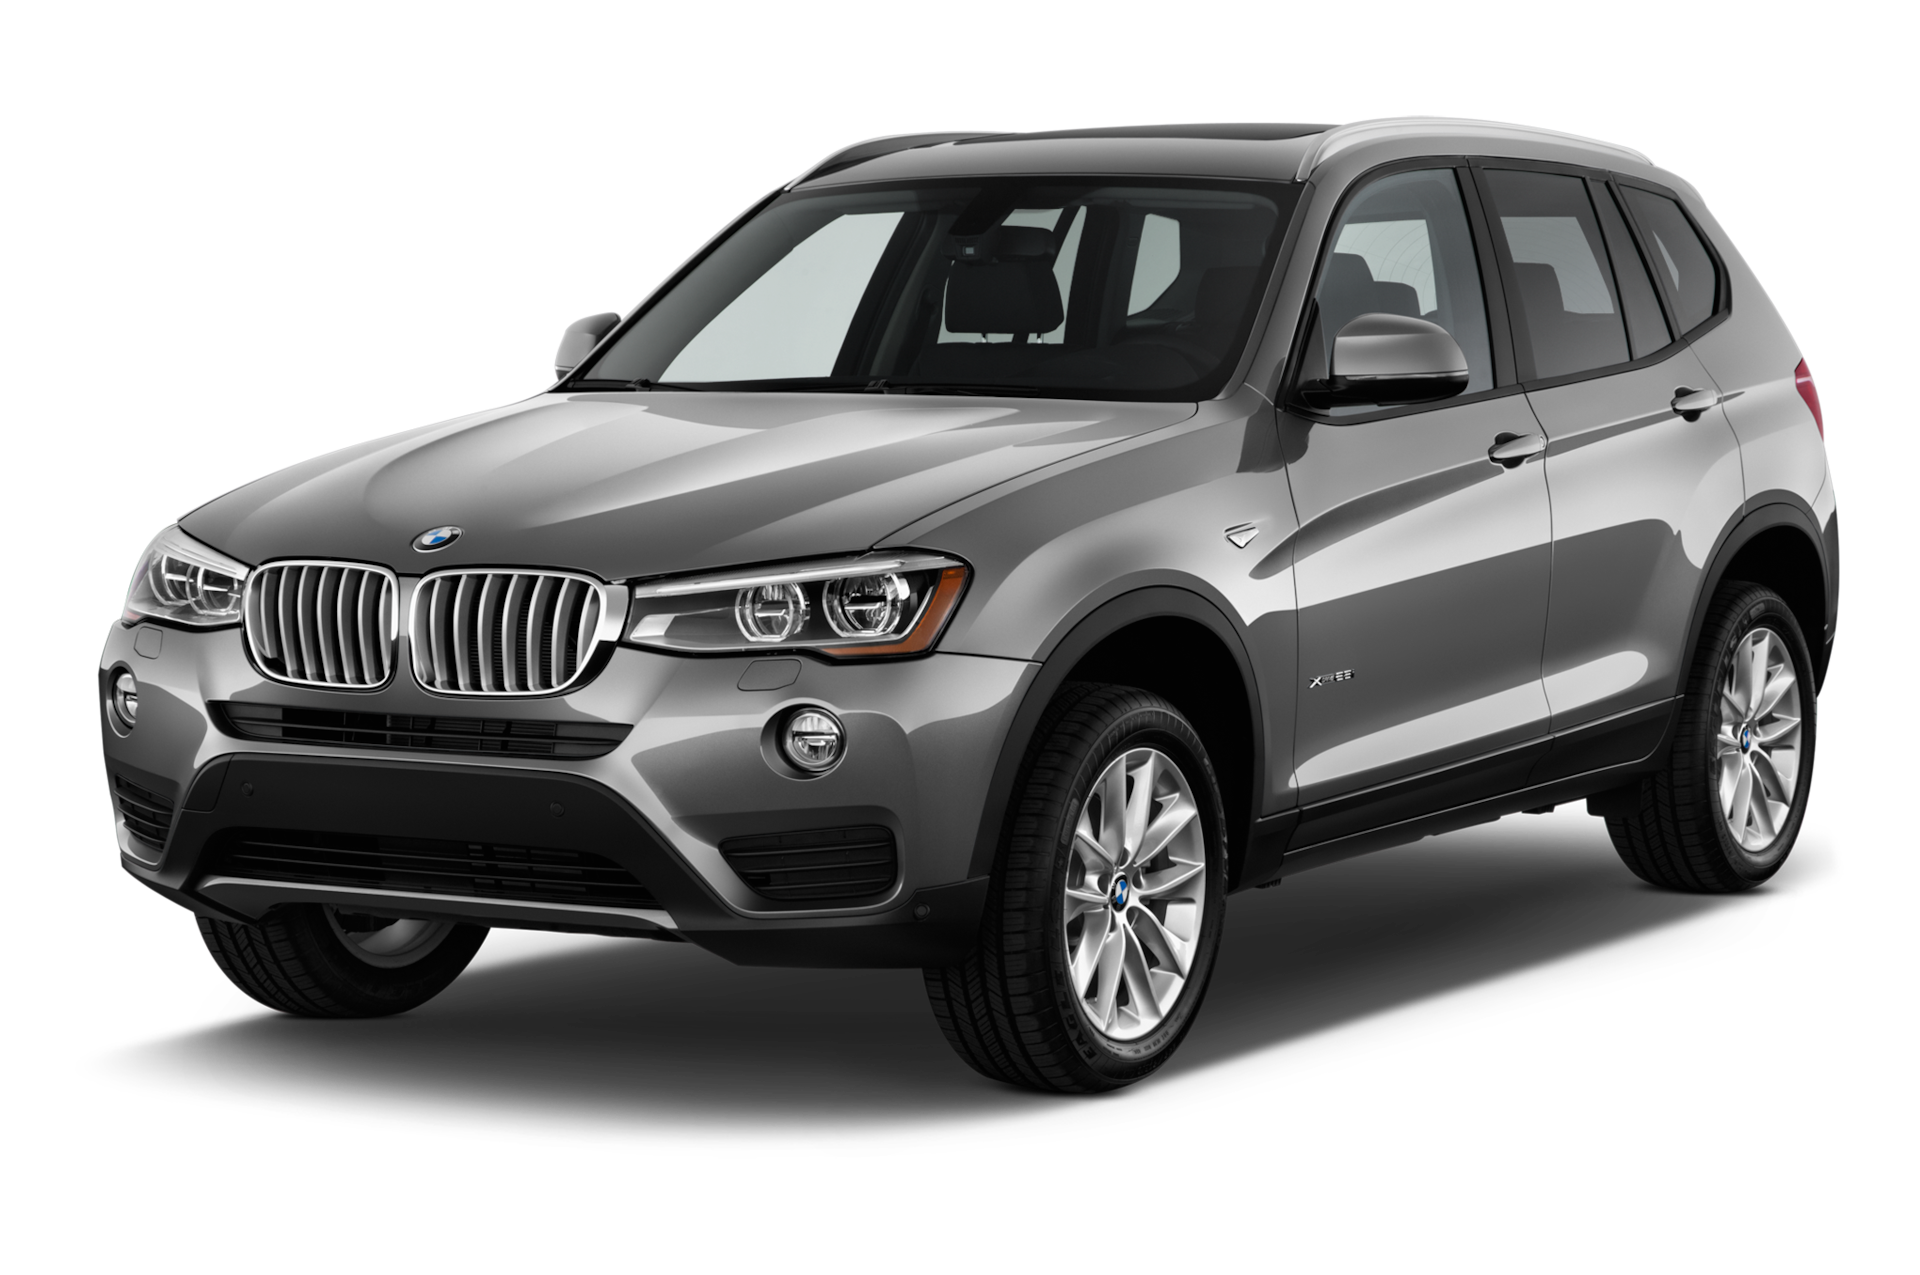 2017 BMW X3 Prices, Reviews, and Photos - MotorTrend